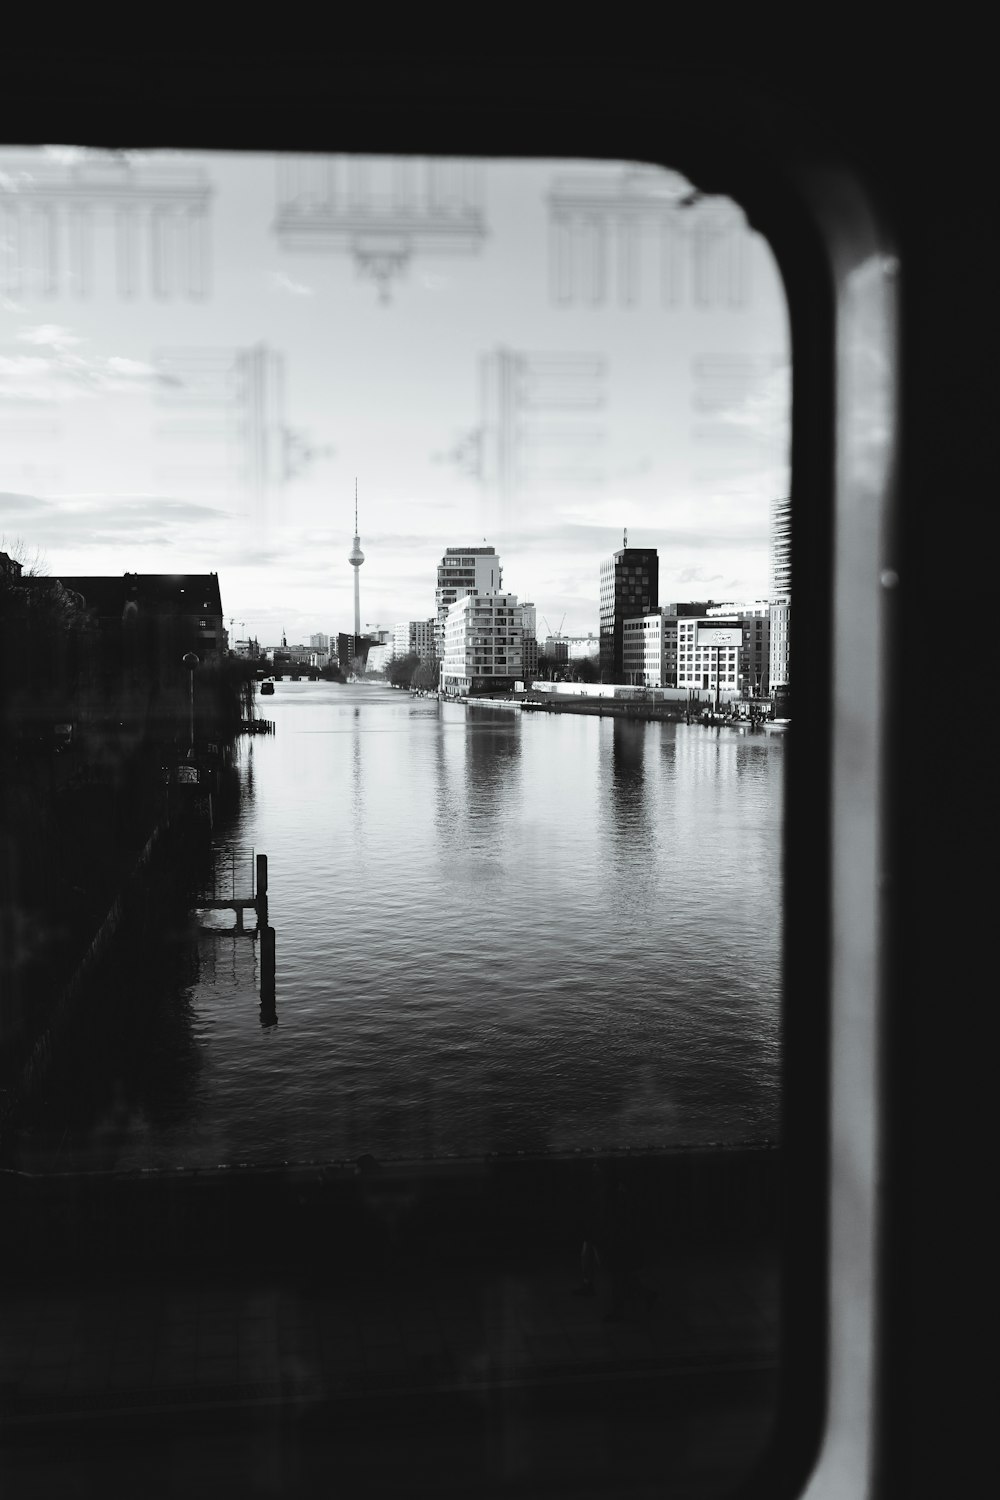 a view of a body of water from a train window